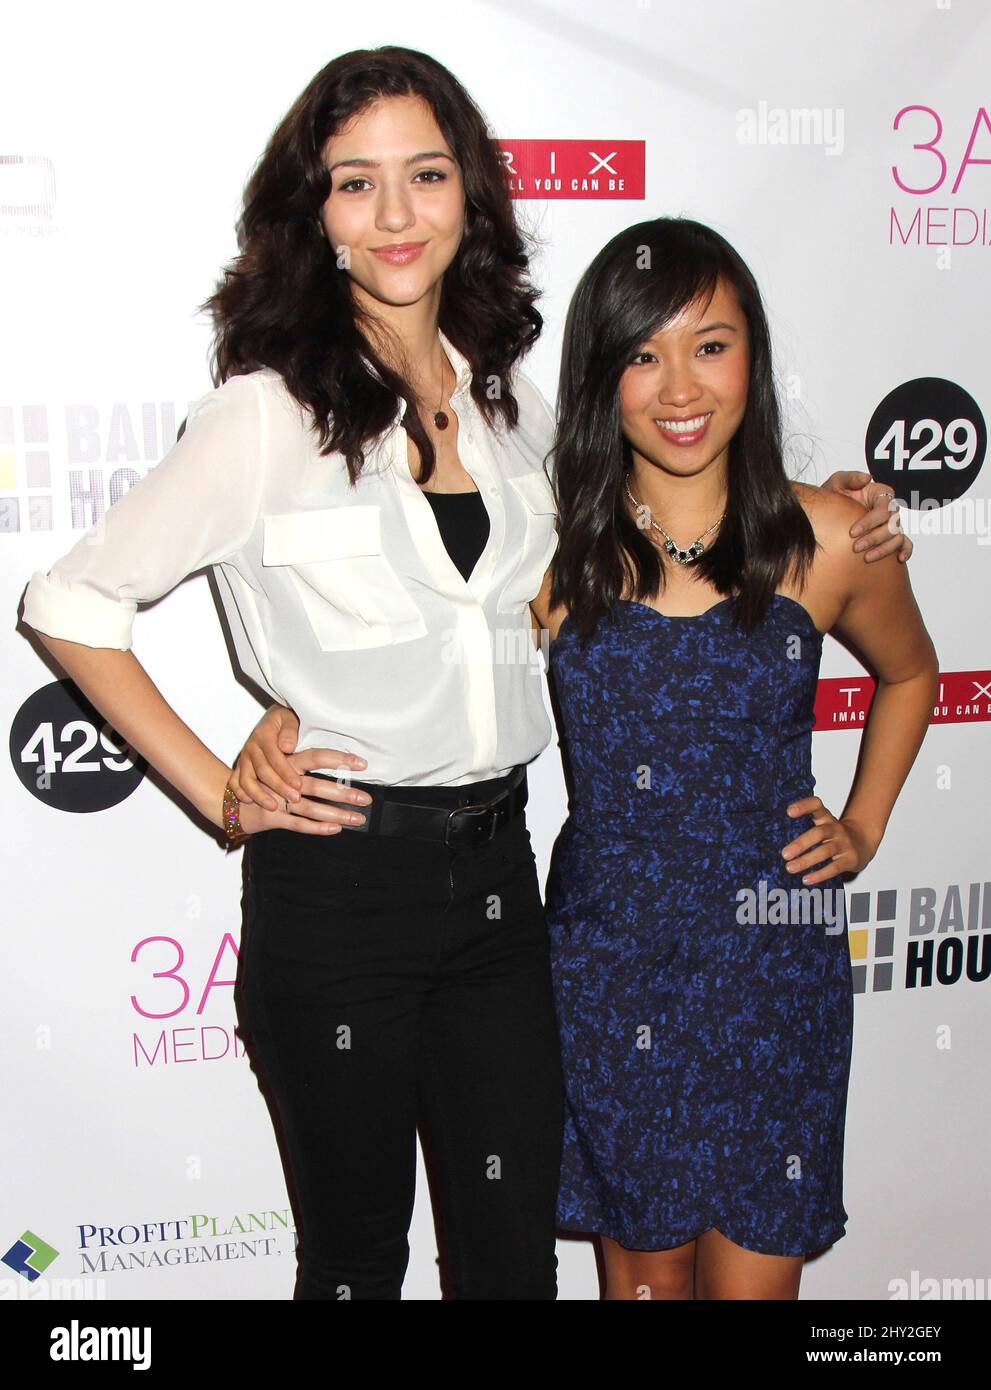 Katie Findlay & Ellen Wong attending the 2013 Bailey House Fundraiser at LQNY in New York. Stock Photo